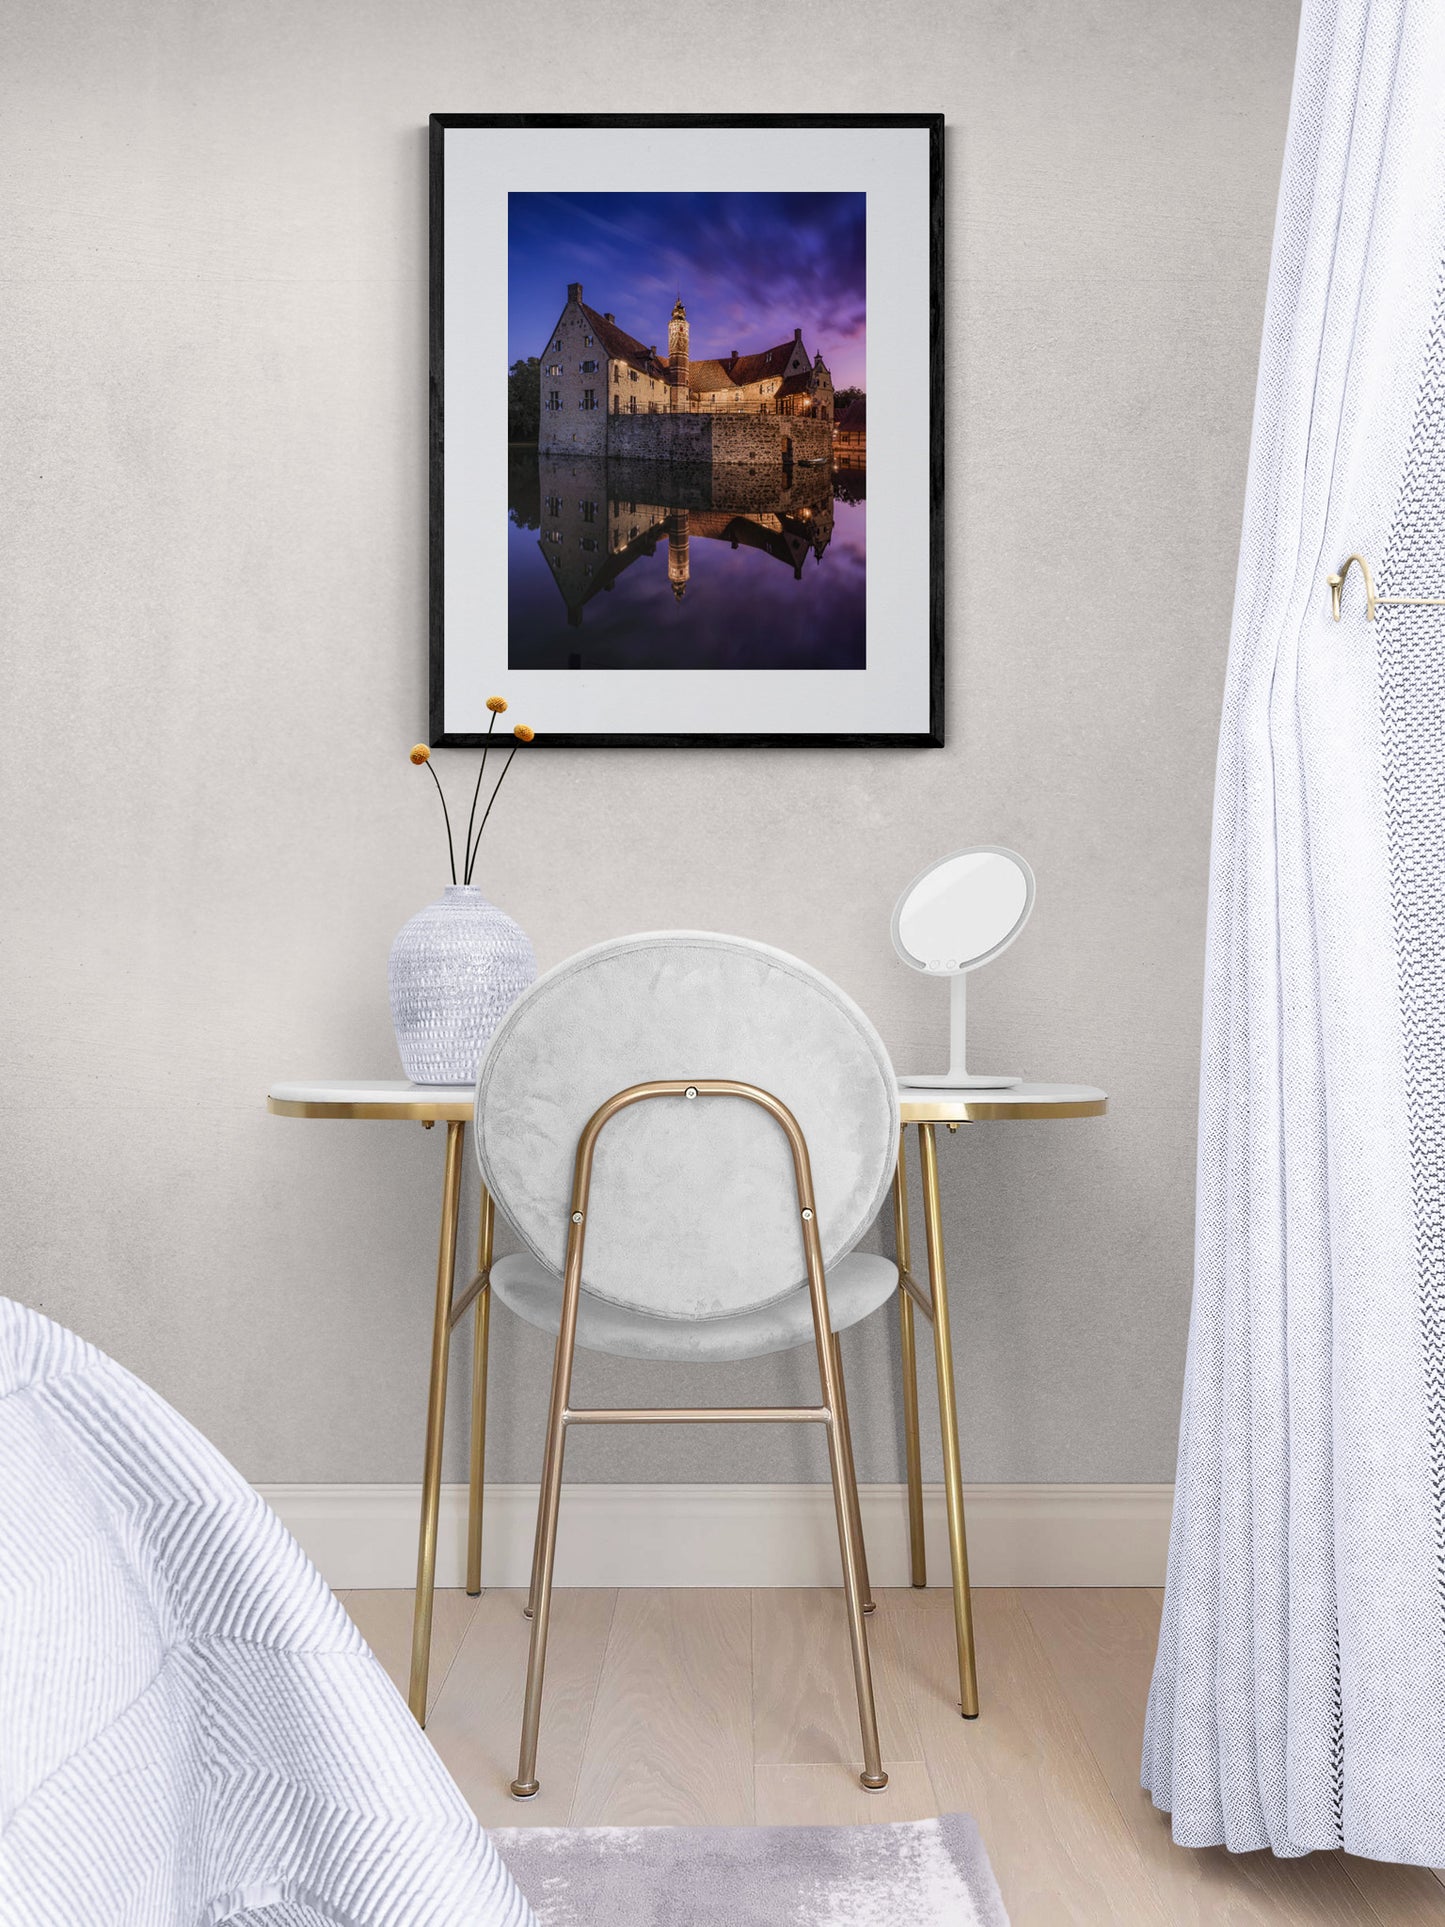 Image Title: Time flies by Photographer: Marcus Danz Location: Lüdinghausen, Germany Image description: Vischering Castle, my home town‘s medieval jewel, shines in all its beauty on this perfect summer evening shortly after sunset. High quality Fine Art print up to 36 inch / around 90 centimeters on Hahnemühle paper available. Medium variant in bedroom.